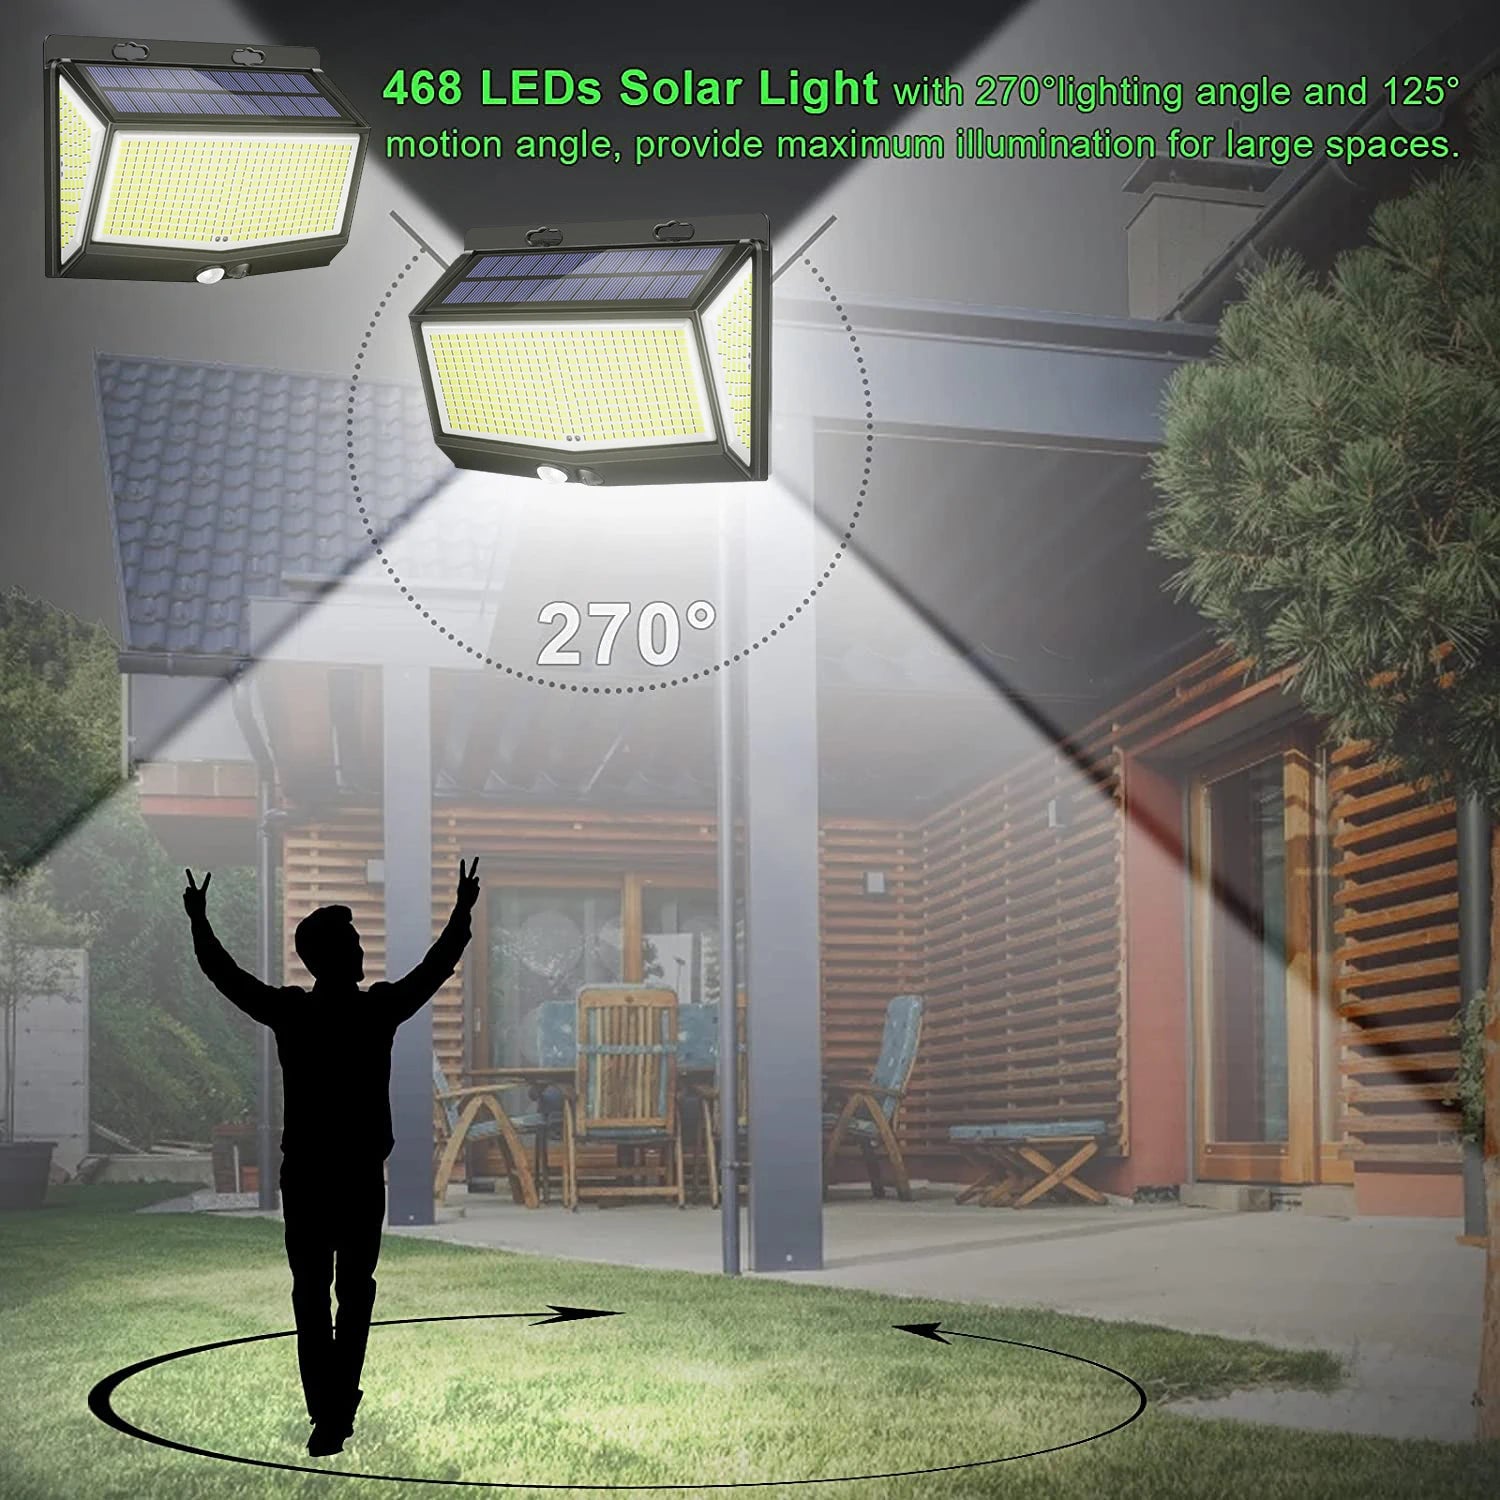 468 LED Solar Light, Solar-powered light with 468 LEDs and wide-angle beam illuminates large outdoor areas.